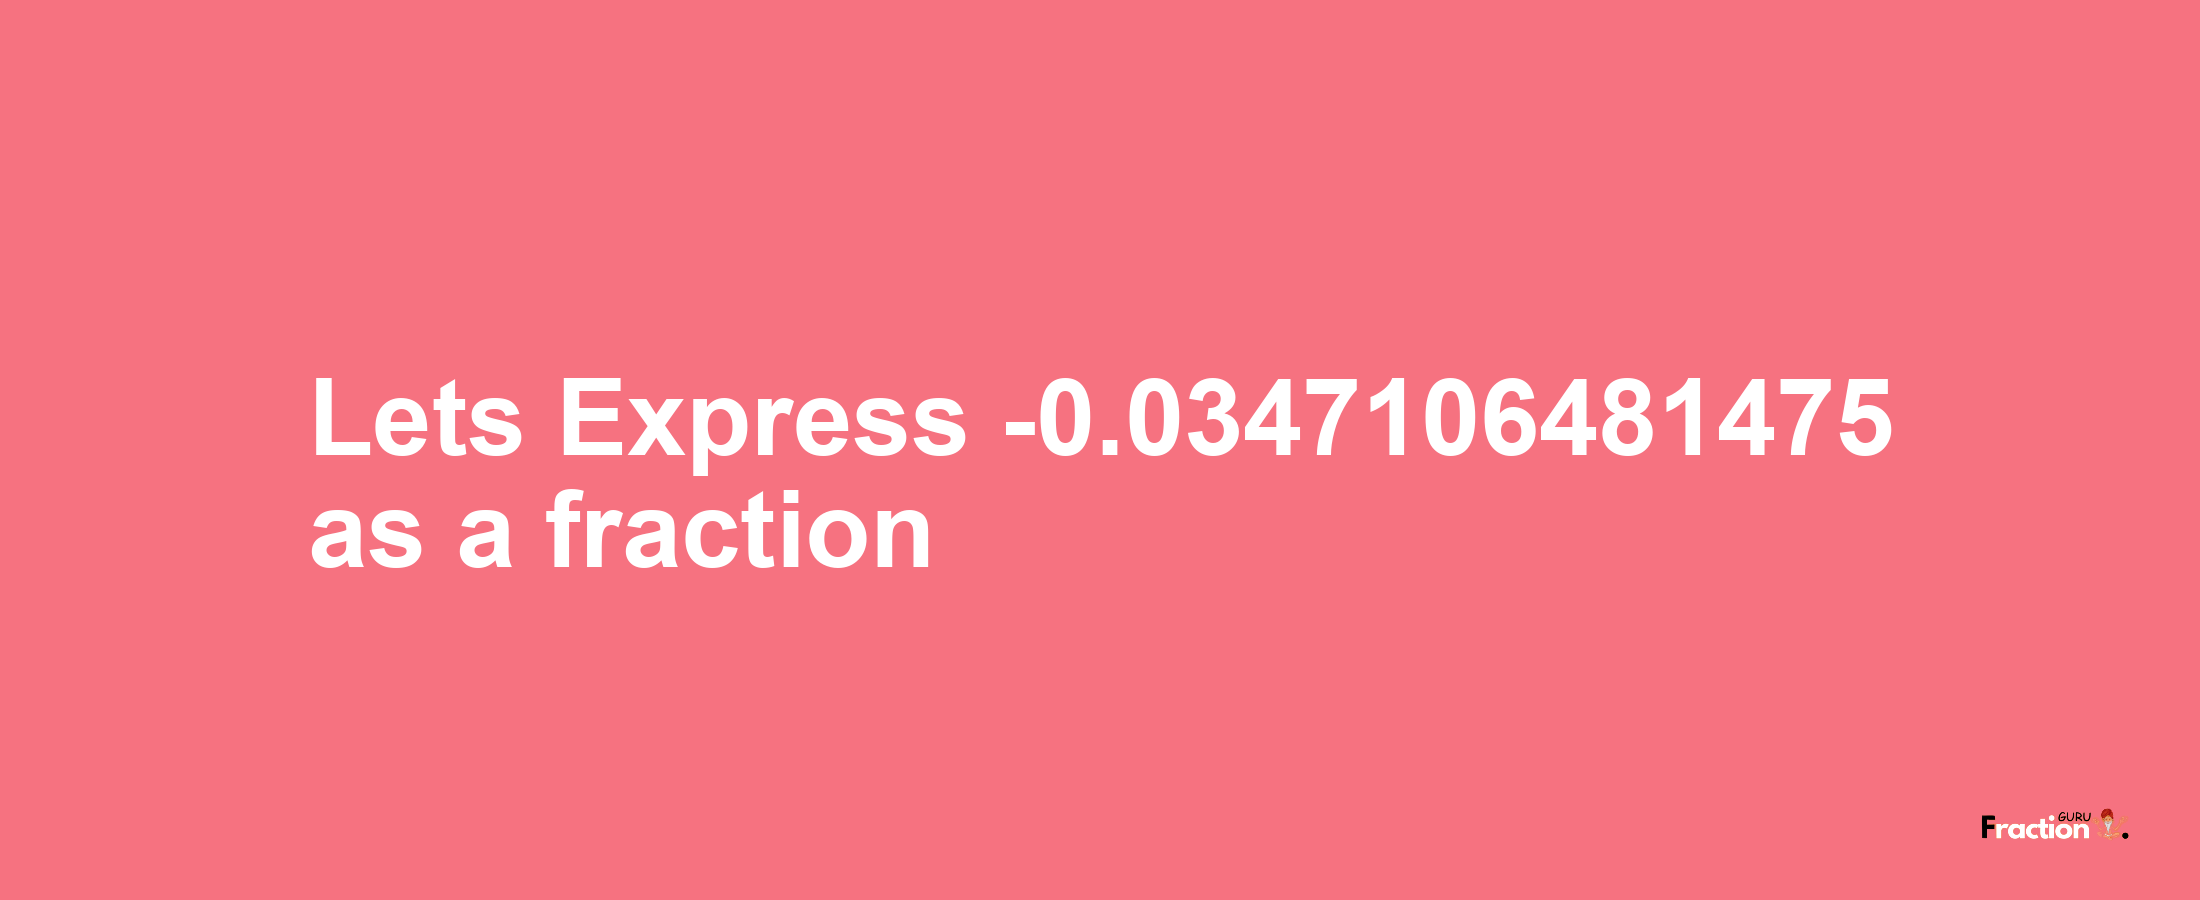 Lets Express -0.0347106481475 as afraction